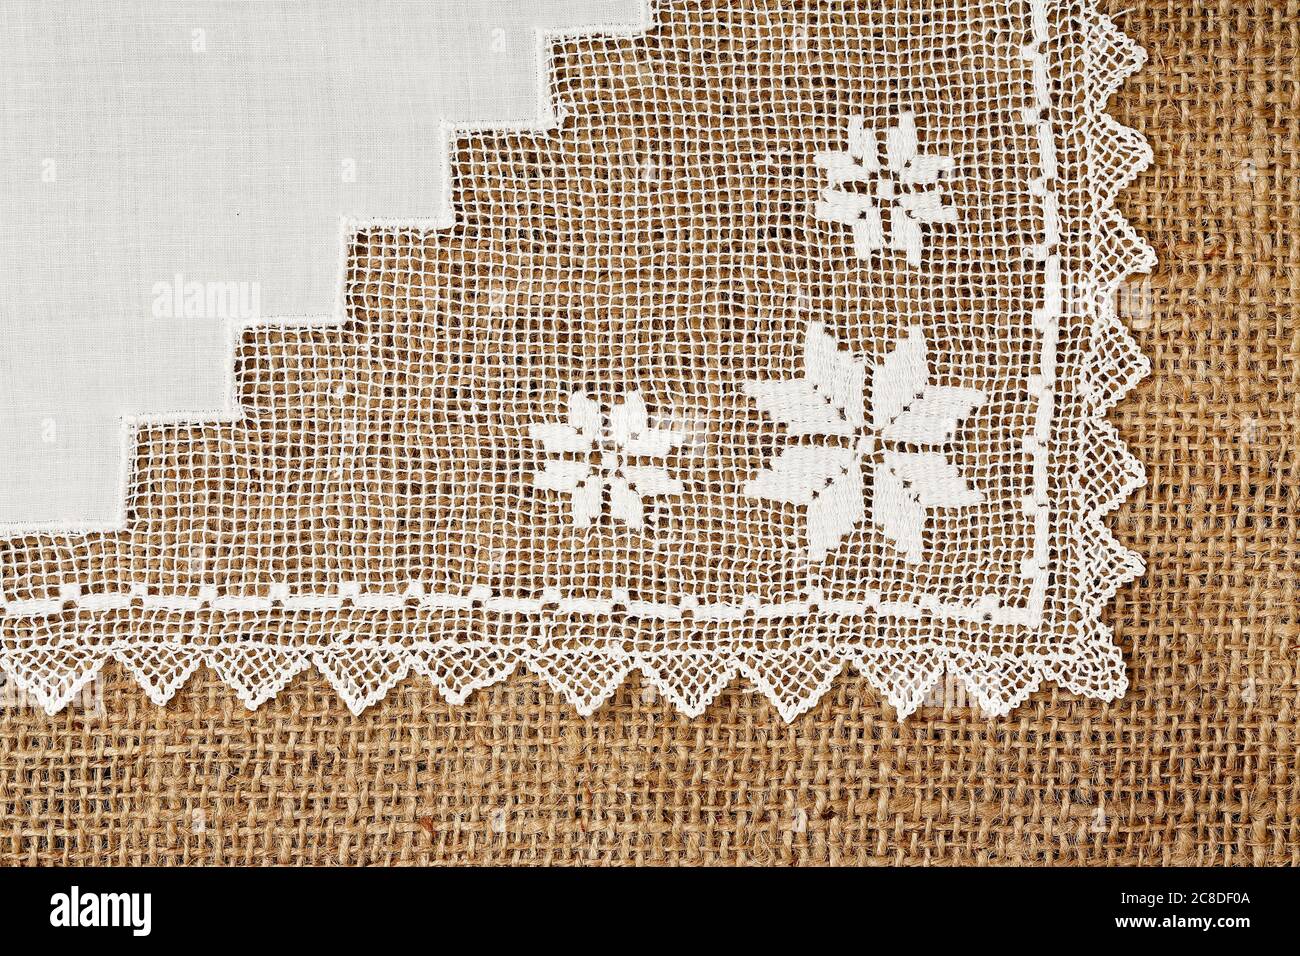 Square Hardanger Embroidery Handmade Doily/Place mat Beige 8 1/2" X 8 1/2" 